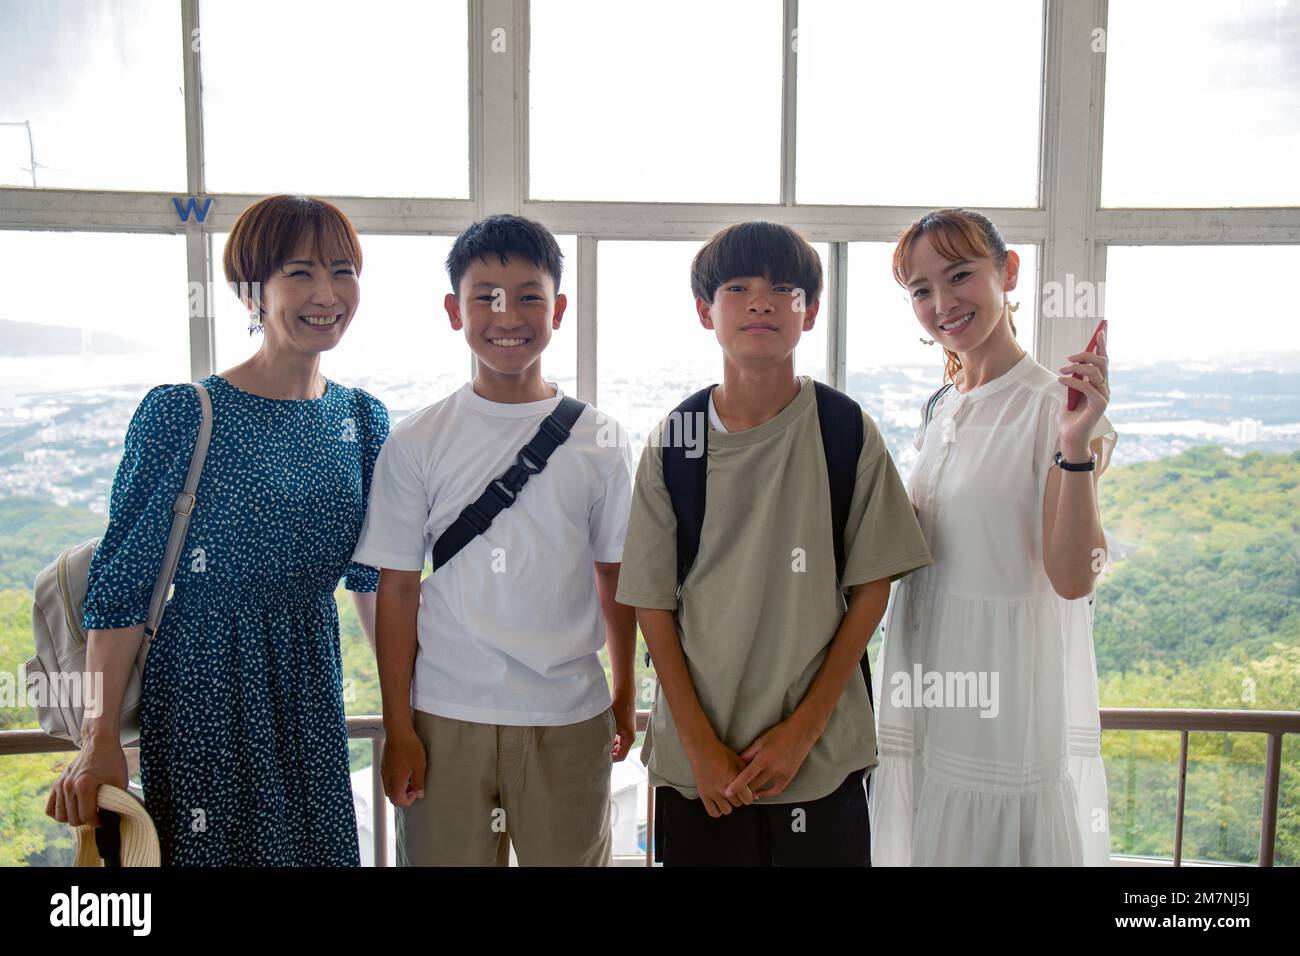 Four Japanese people, two boys and two mature women on a day out, posing for a photograph, side by side, on a viewing platform. Stock Photo